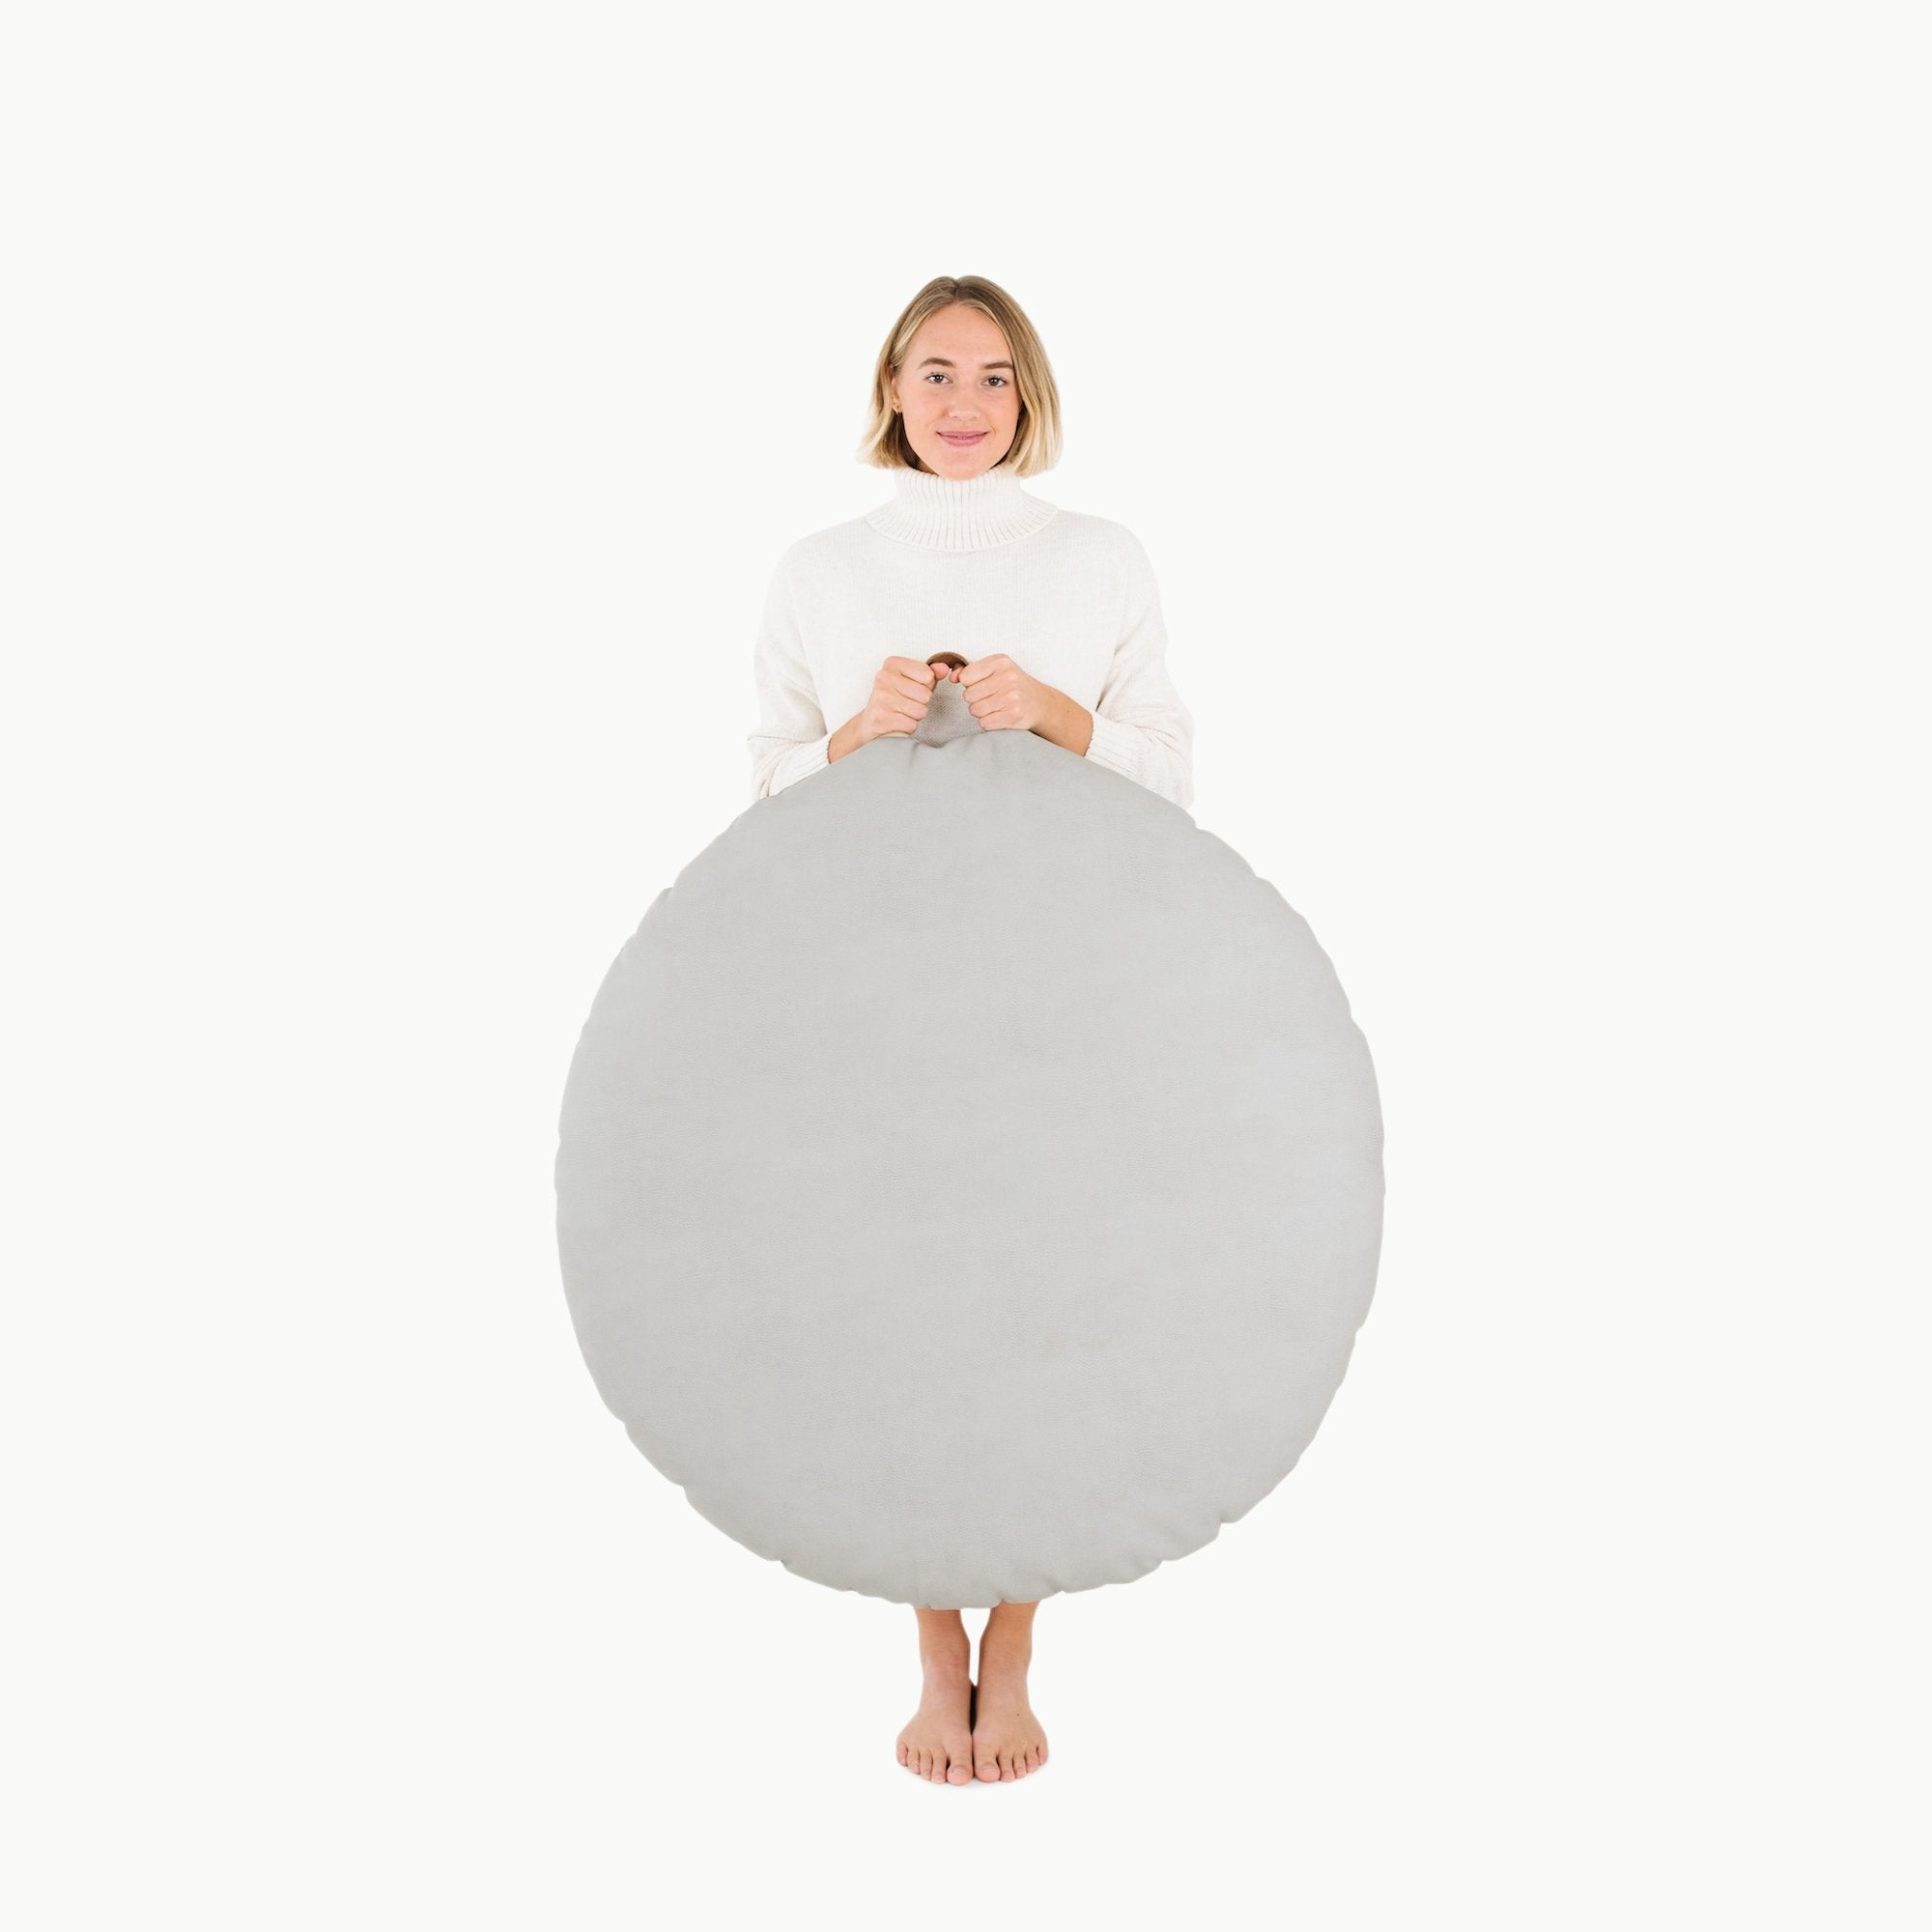 Pewter (on sale) / Circle@Woman holding the Pewter Circle Floor Cushion